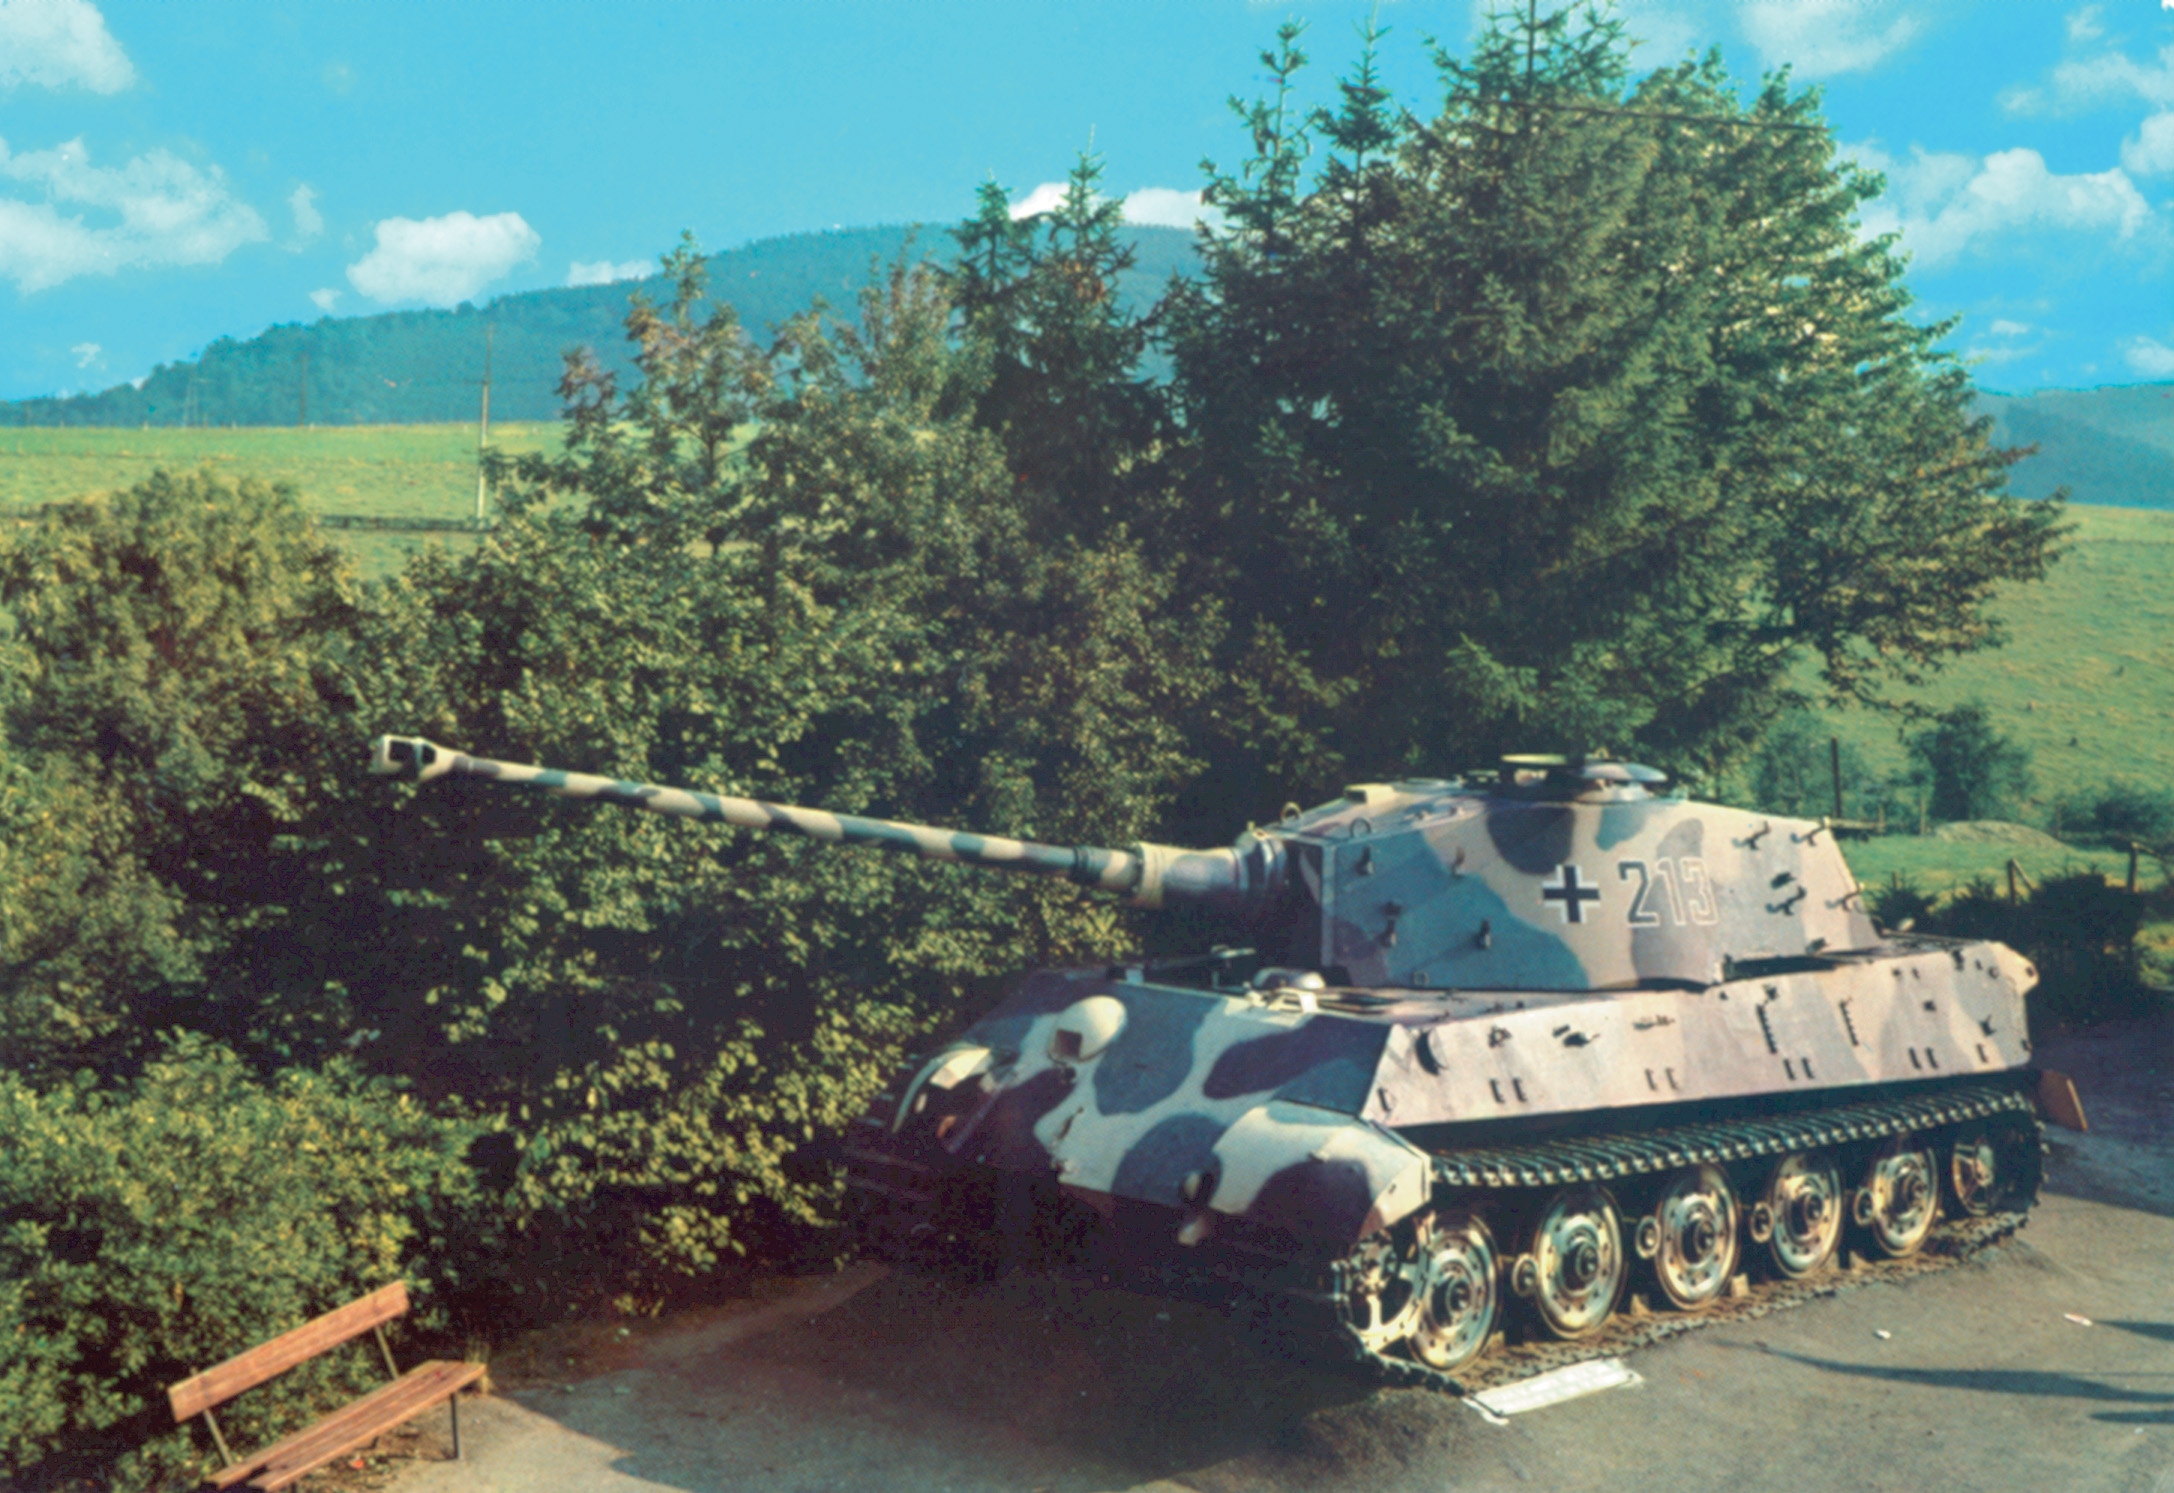 A German Tiger II tank stands sentinel on the now quiet battlefield at La Gleize in this modern photograph.